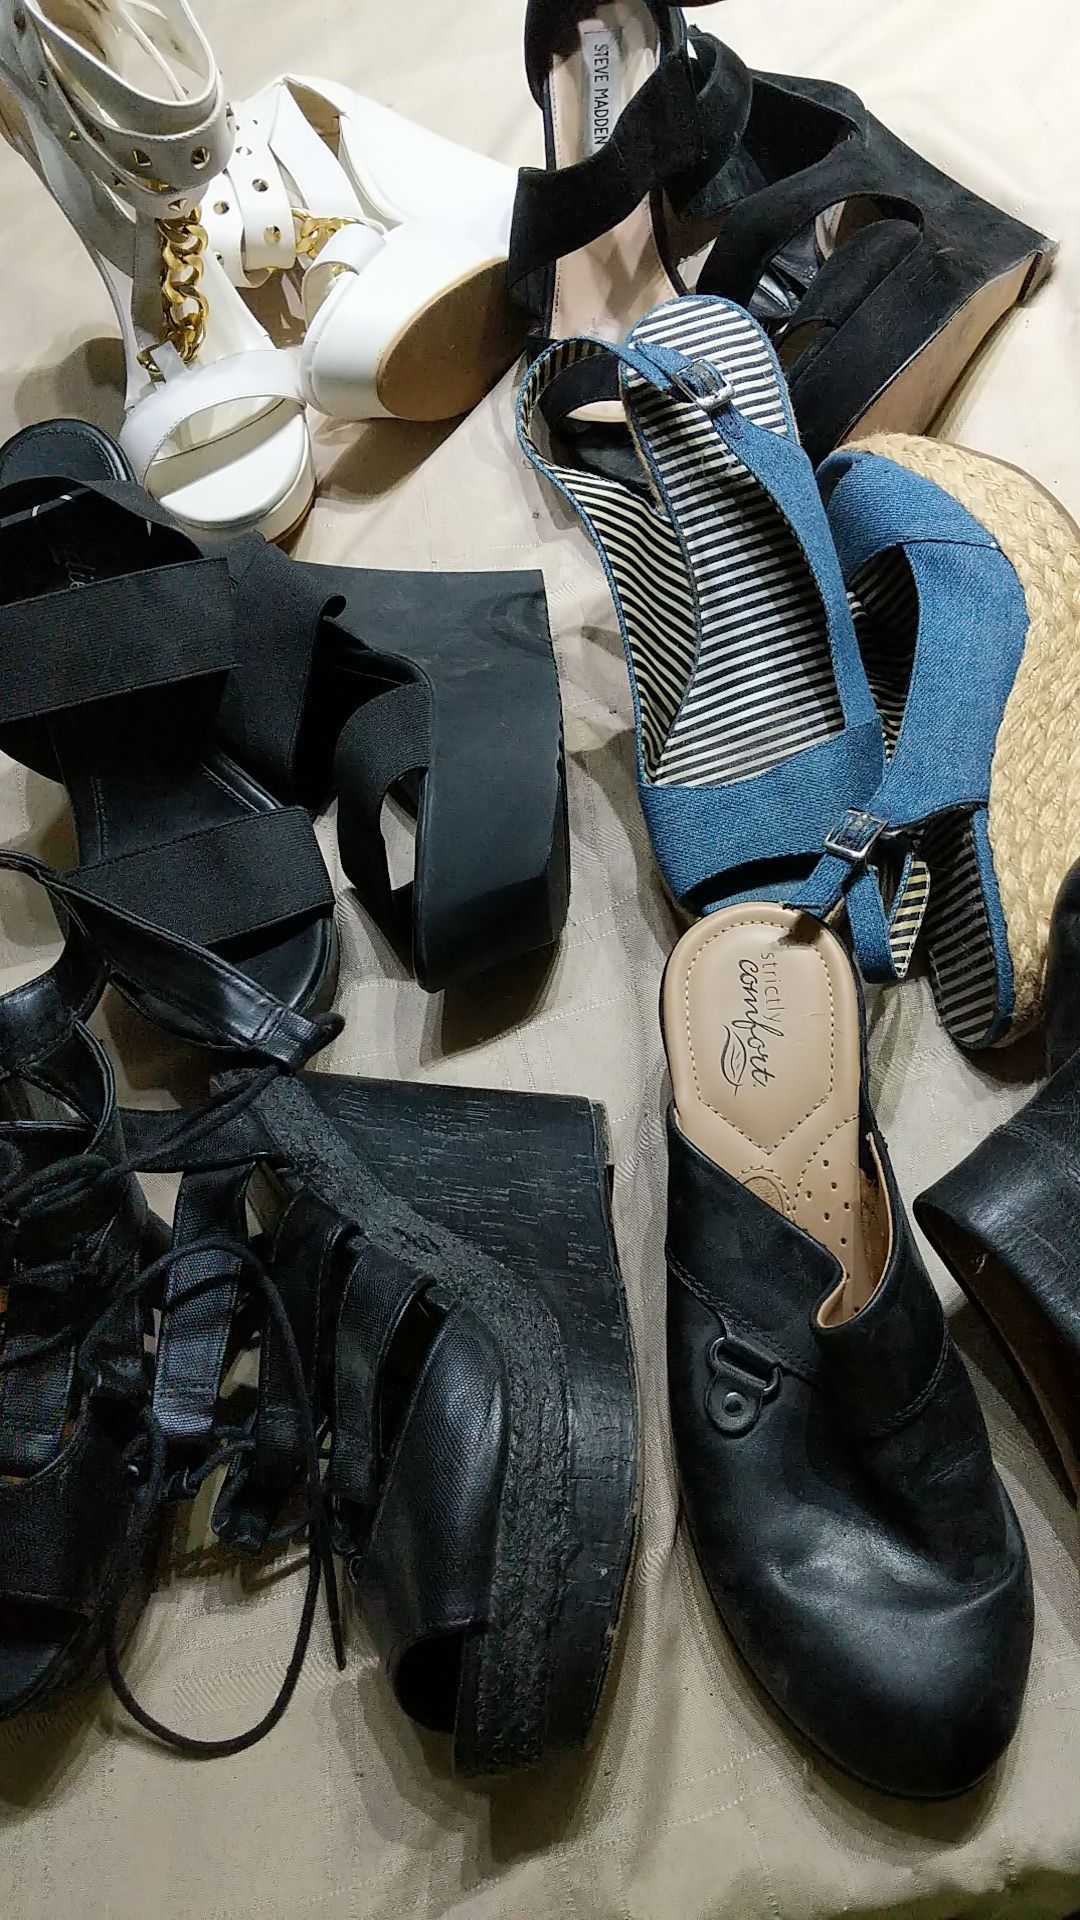 Lot of six pairs of women shoes size 9